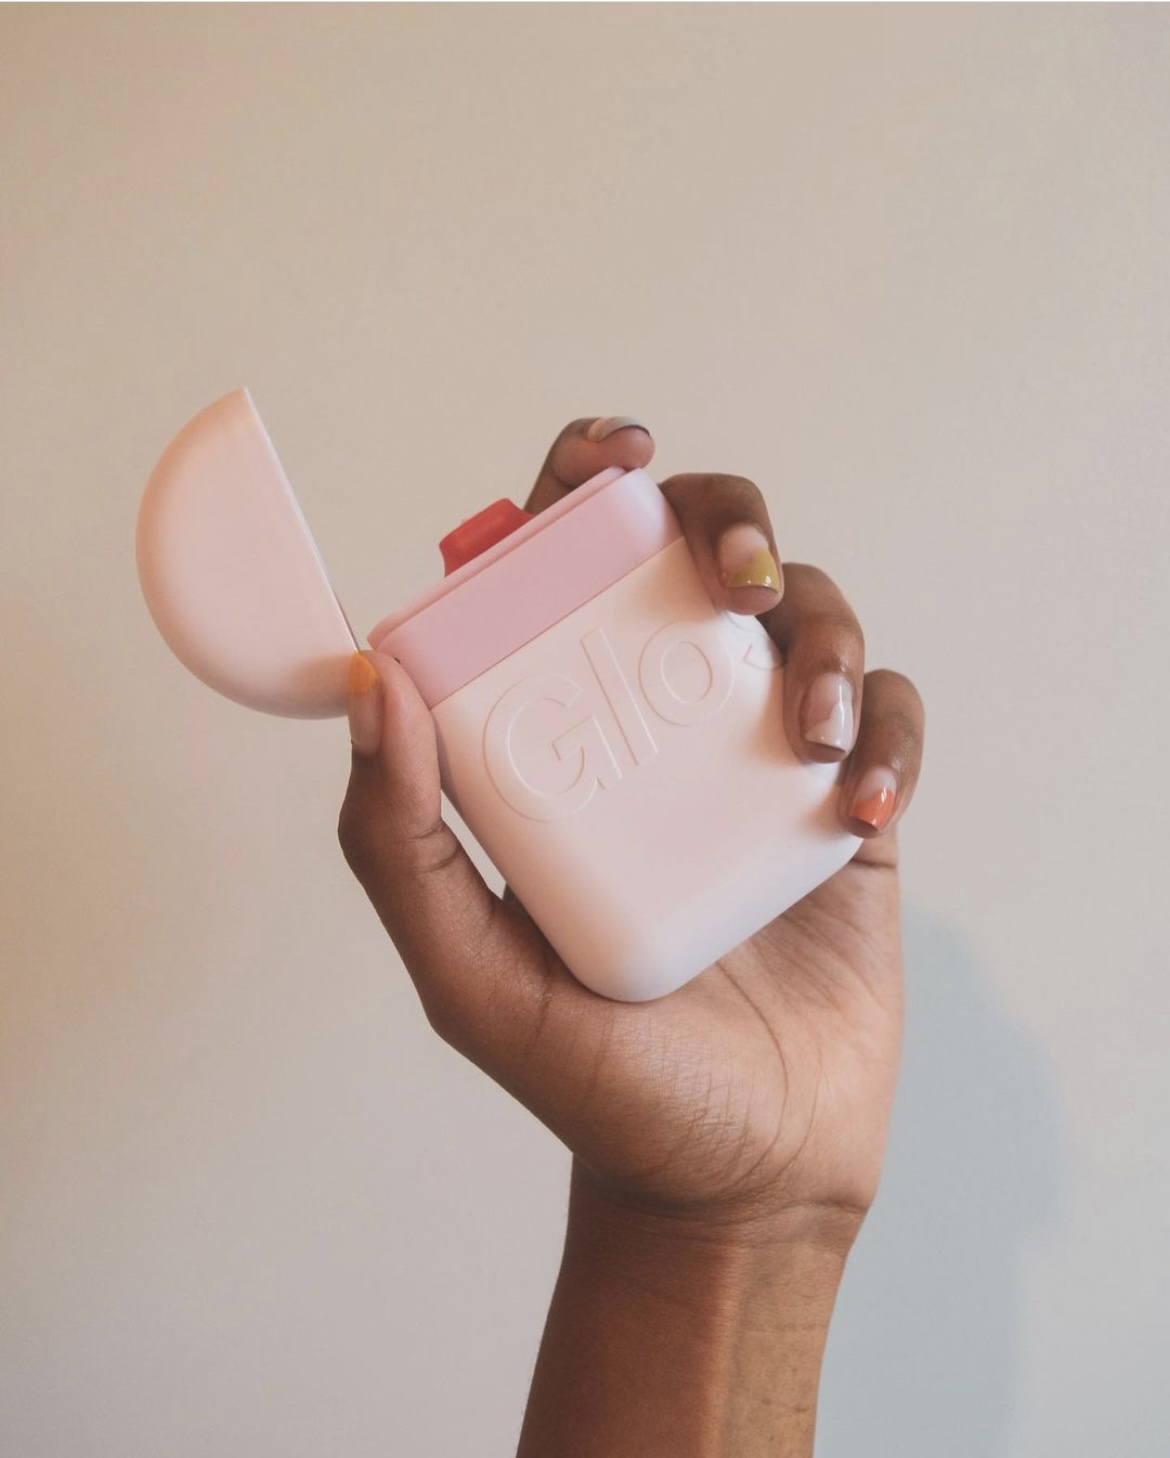 I’ve Tried Basically Every Glossier Product—This Is What I Really Think